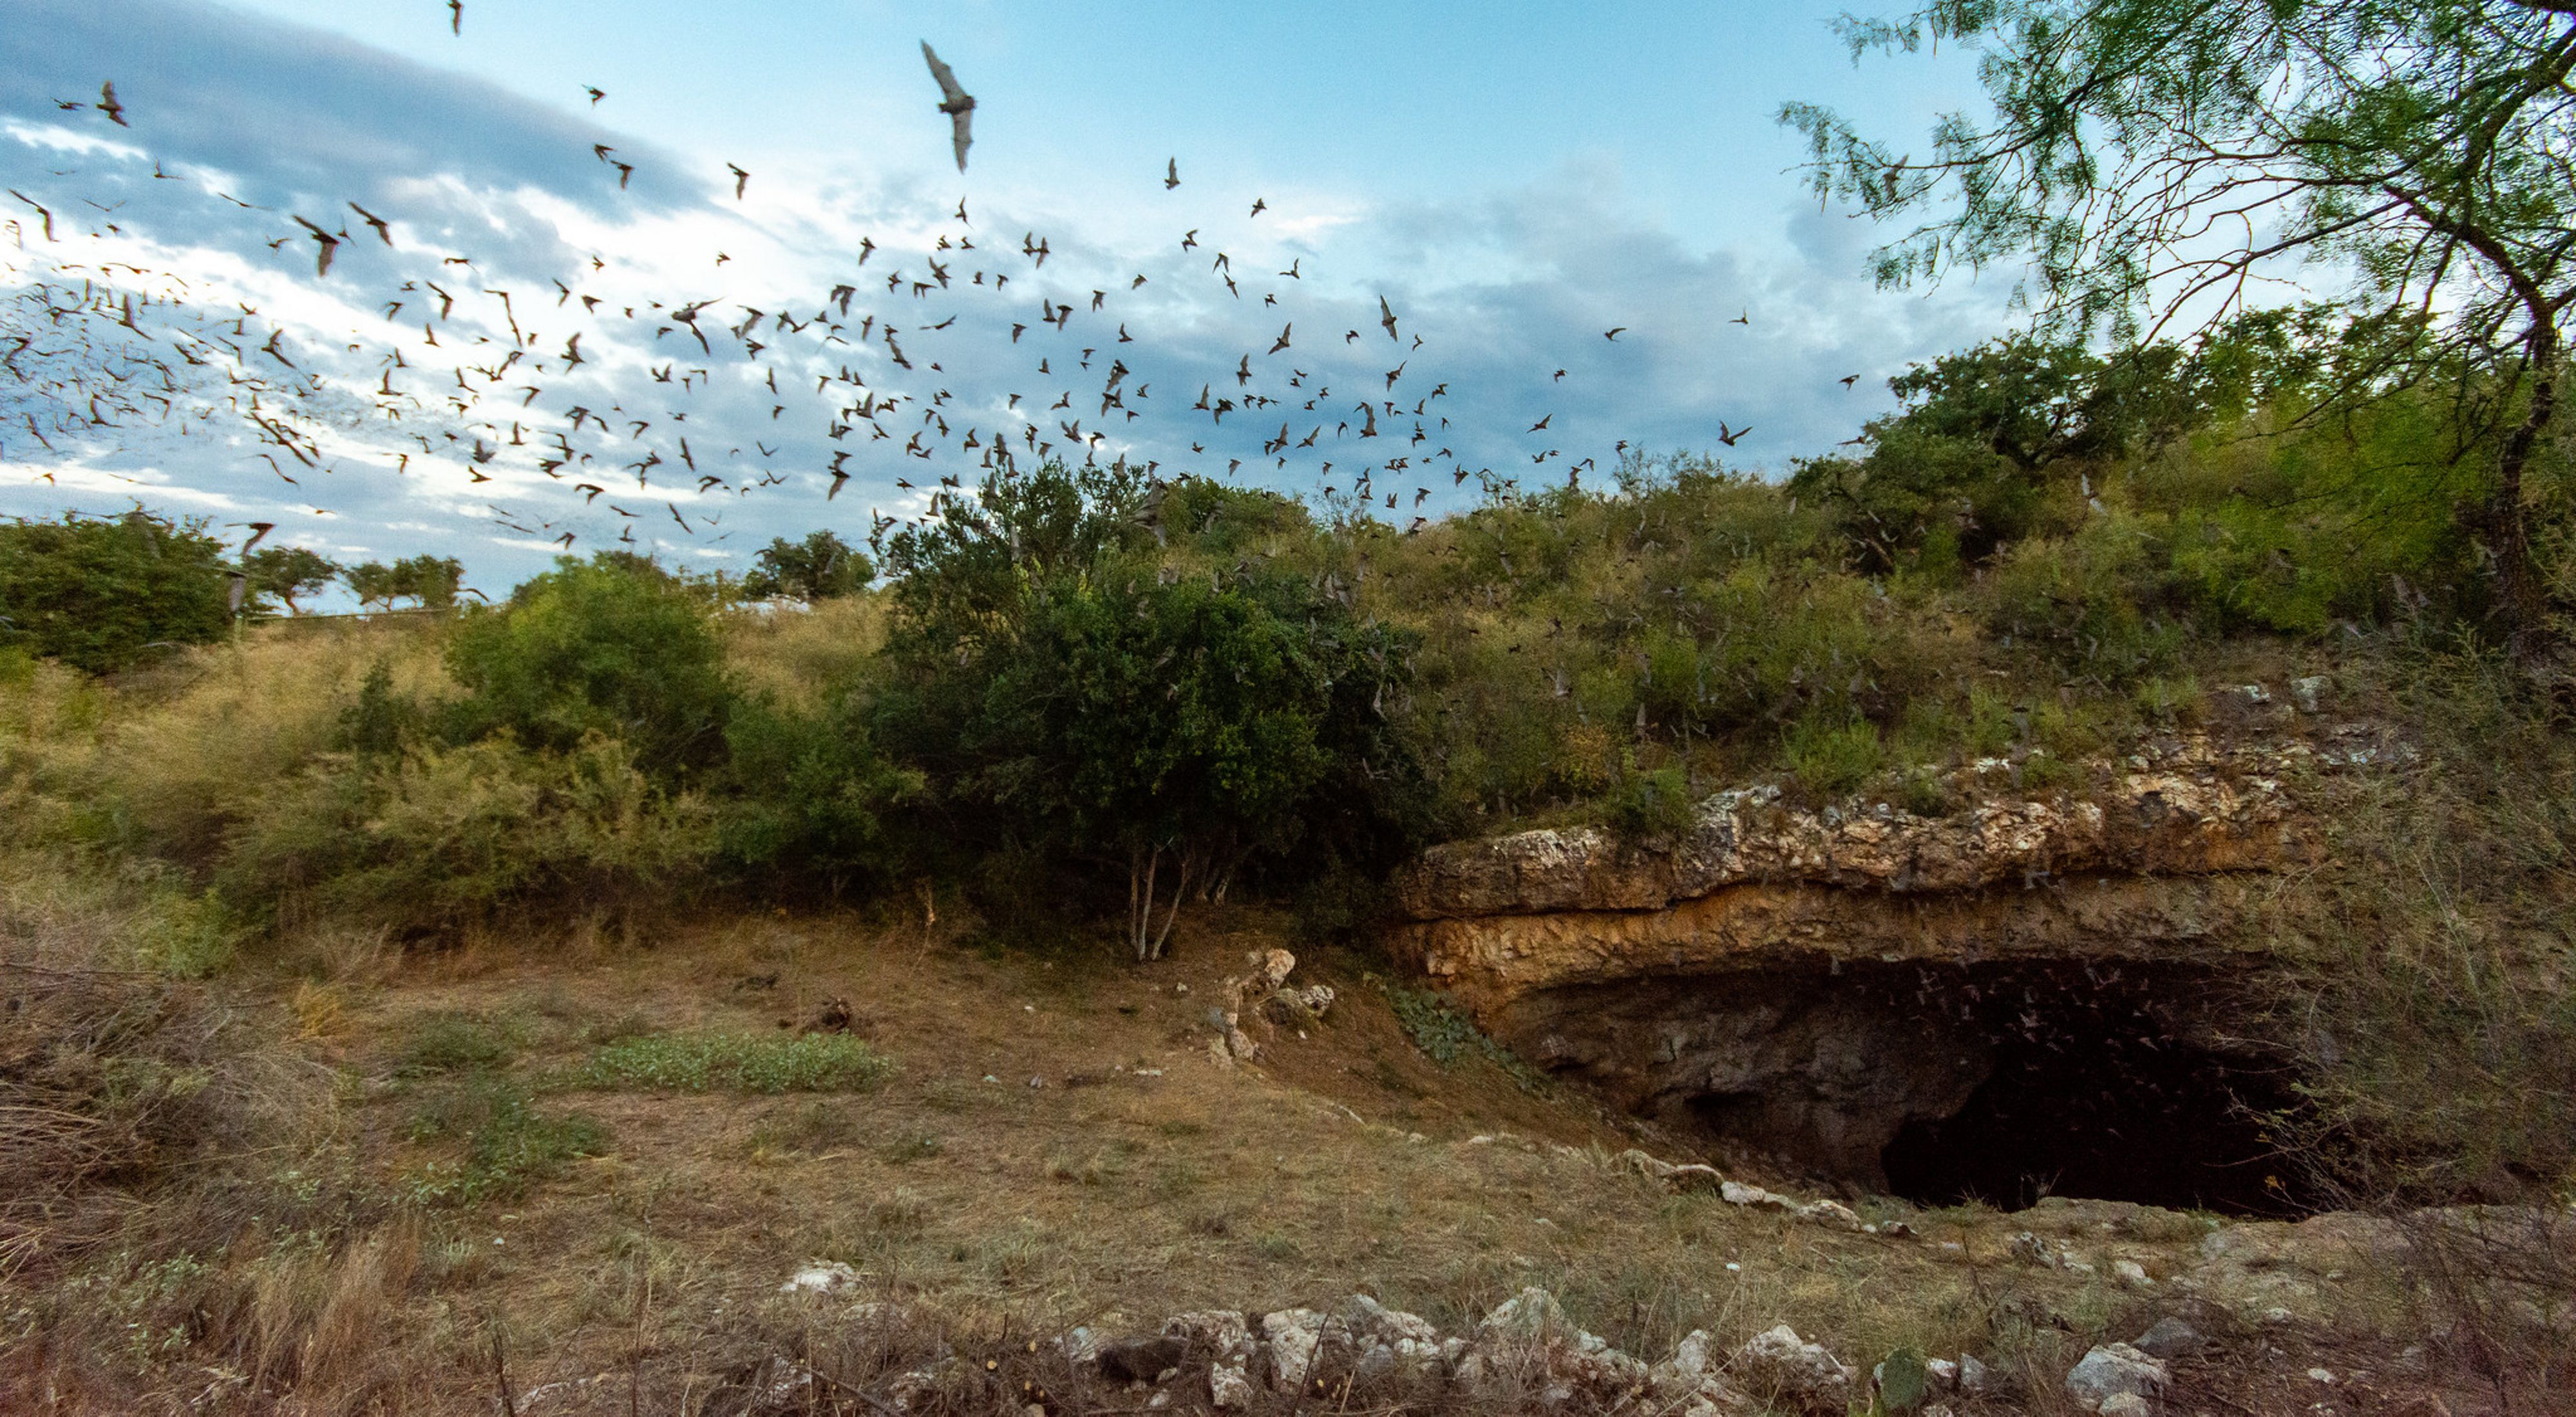 Small black bats fly out of the opening of a stone cave covered in grass.